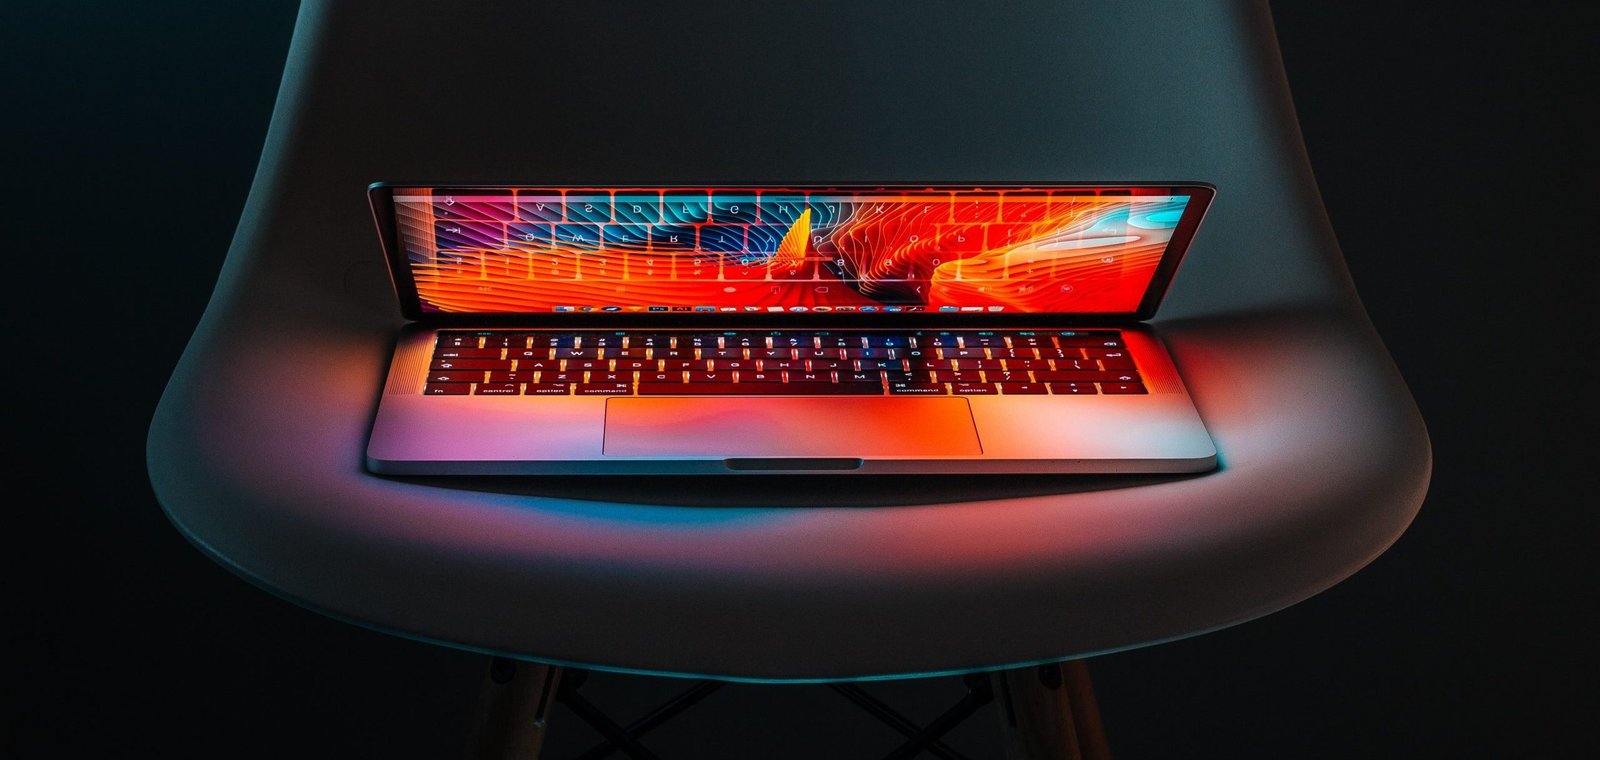 futuristic photo of a laptop halfway open lighting up the chair it's sitting on